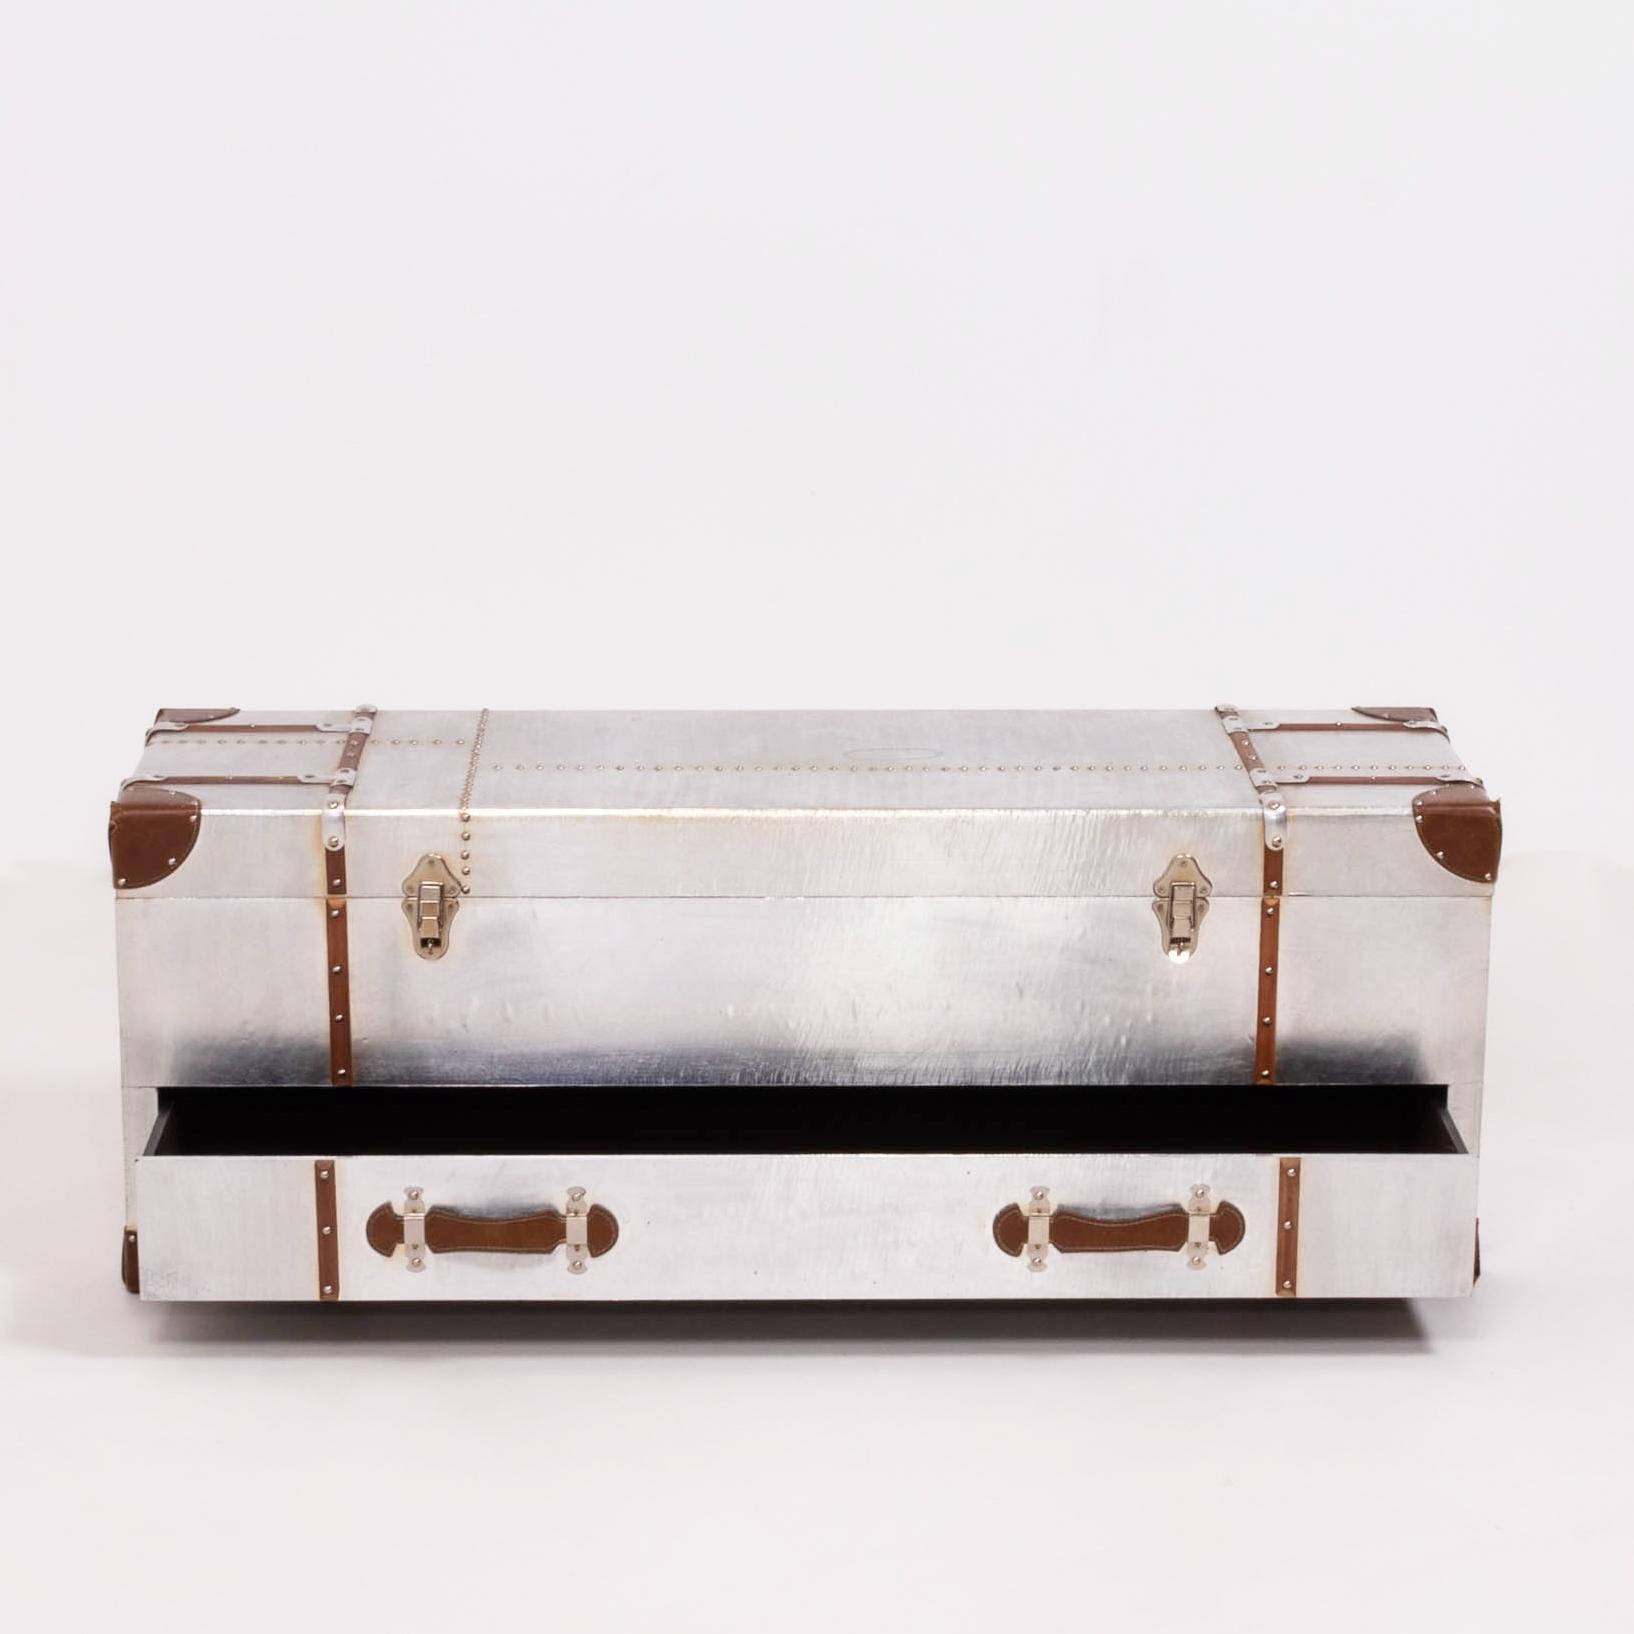 This Industrial style silver storage trunk is constructed from a wood frame and wrapped in aluminium with brass rivet detailing. With leather pulls and details this trunk is sure to make a statement in any home. An easy pull out drawer is great to